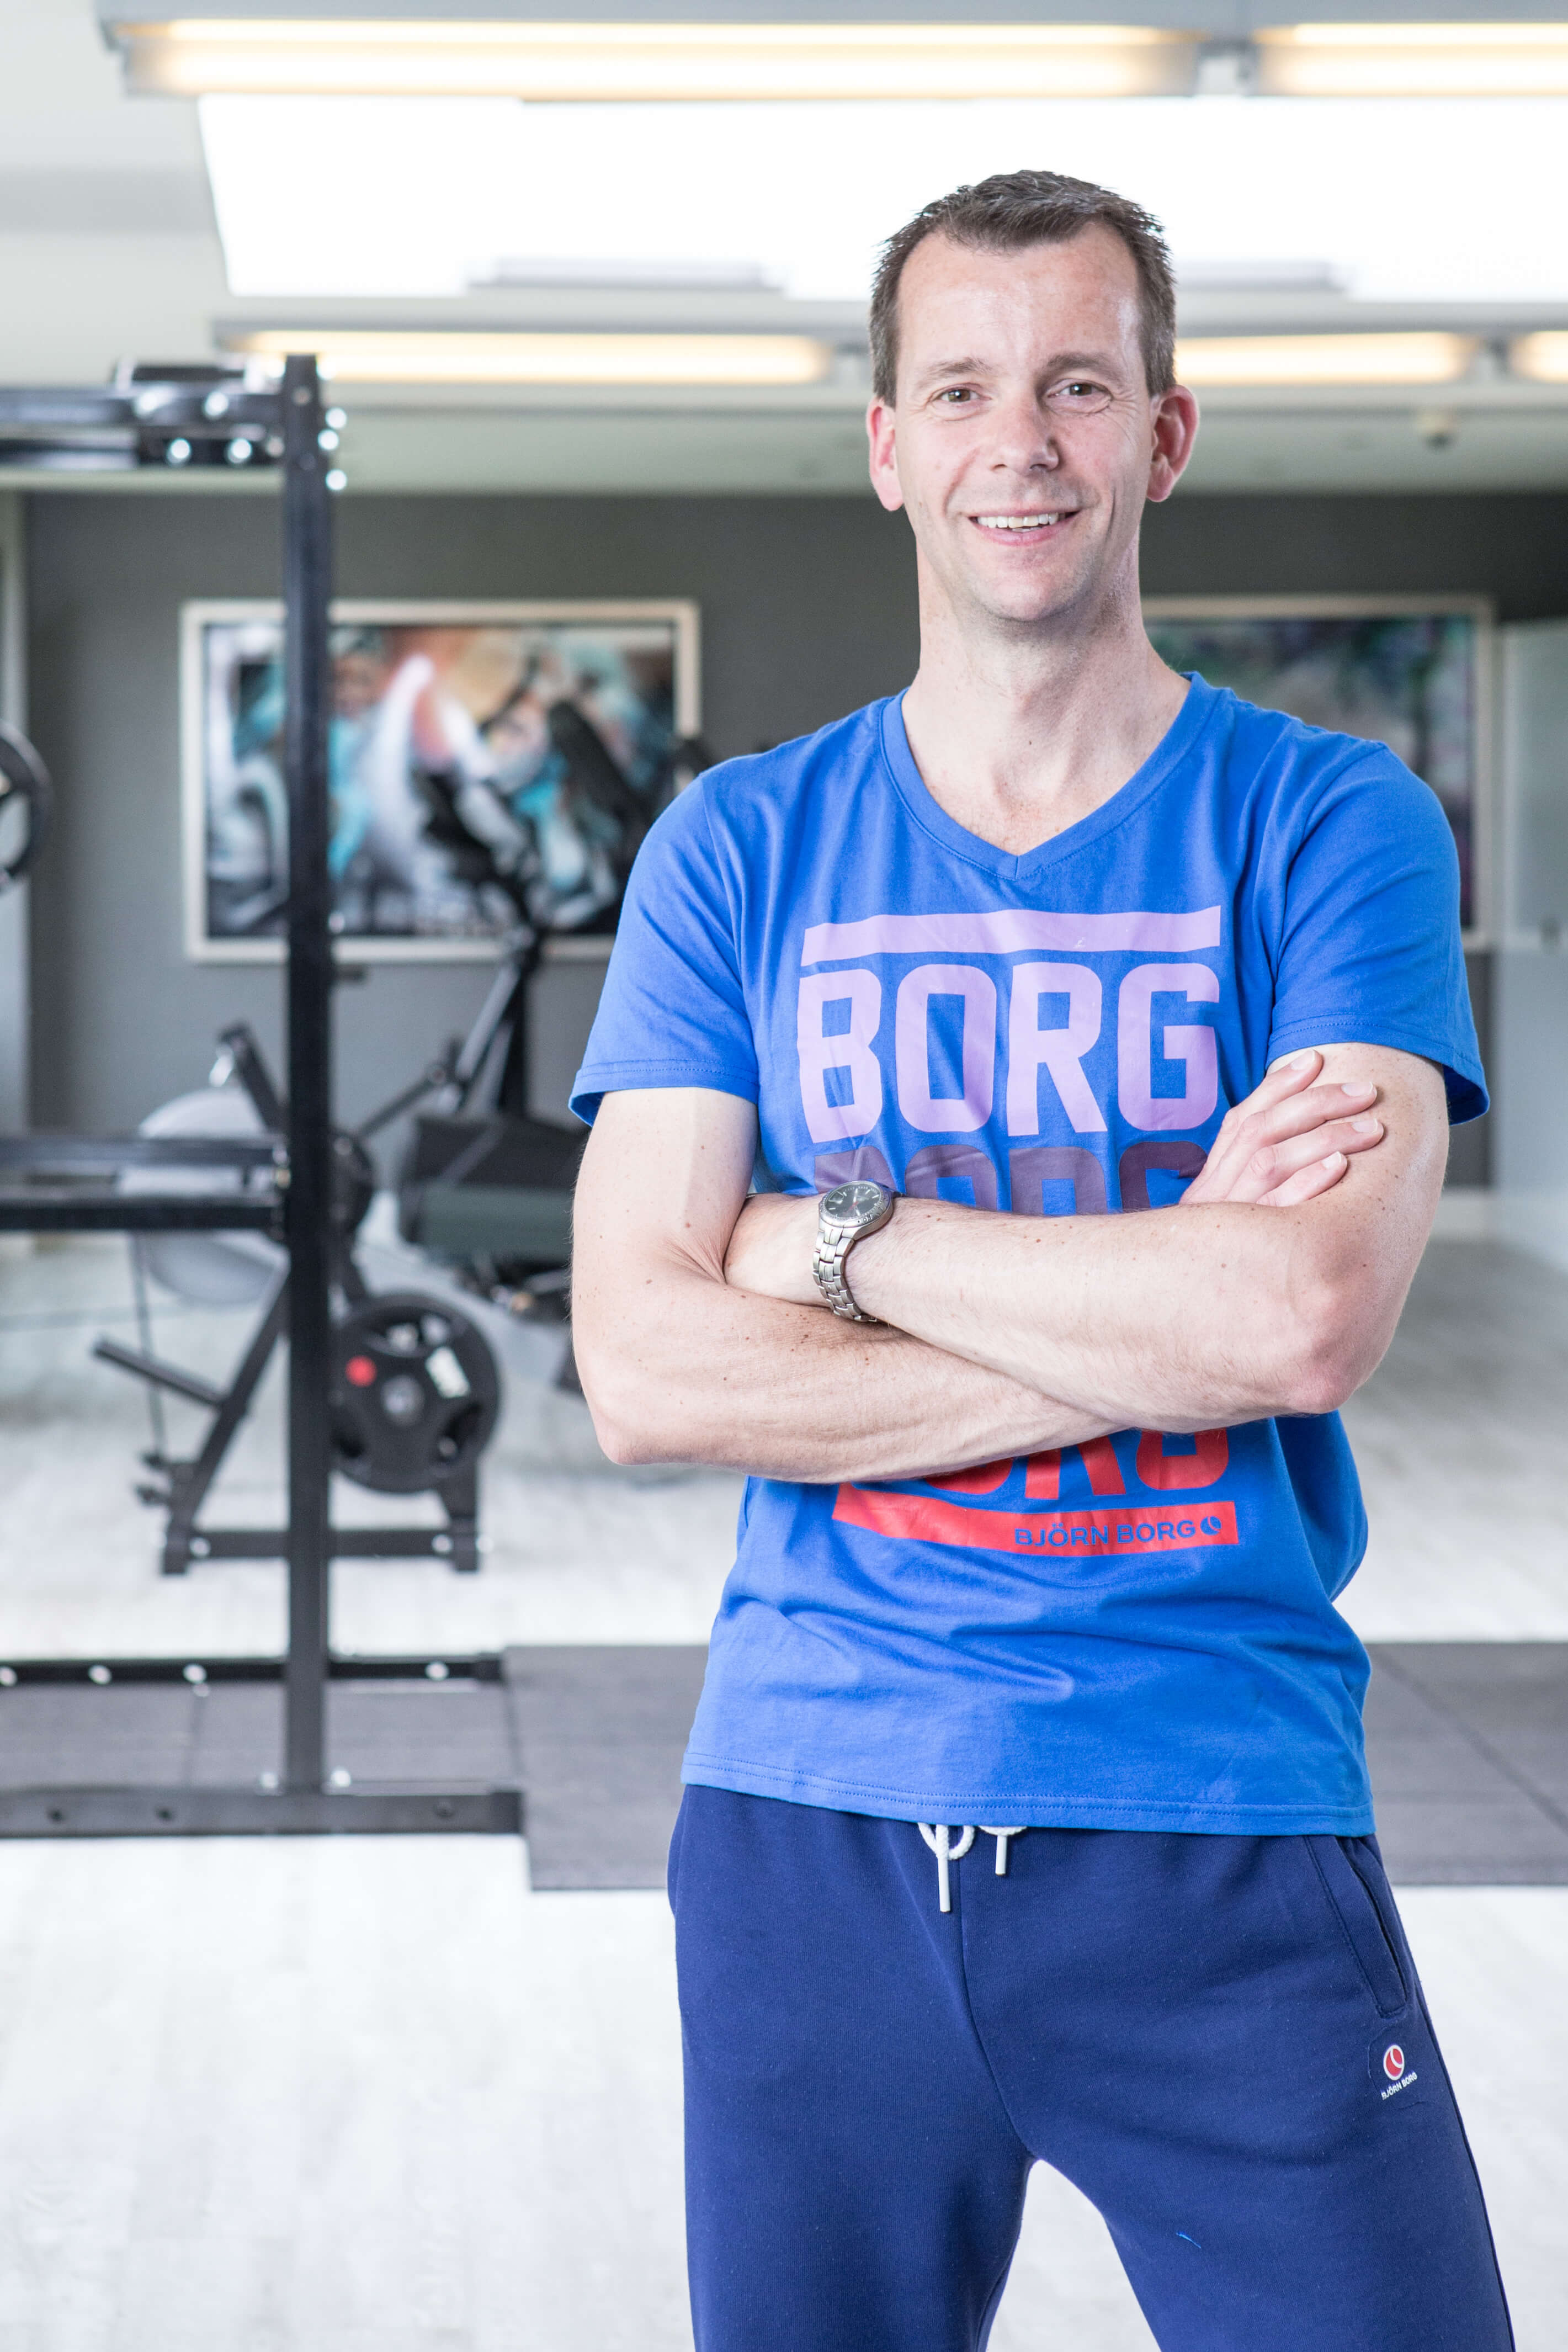 Personal trainer Enschede